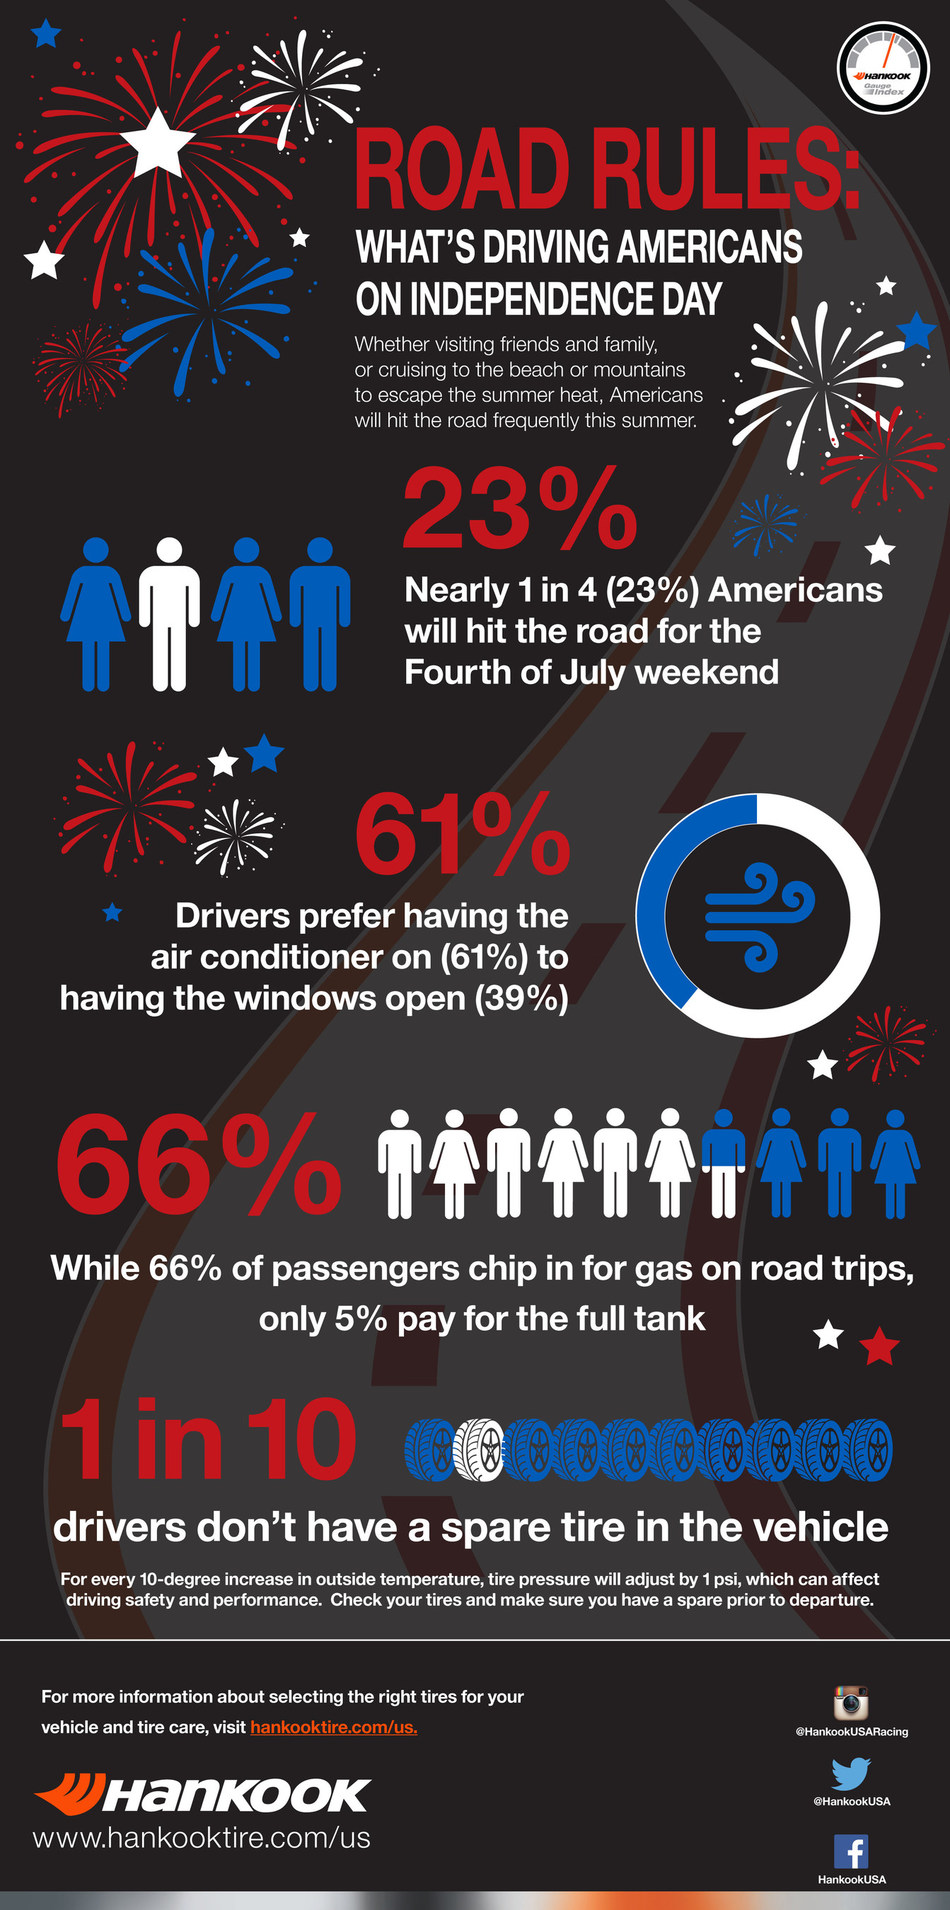 Hankook Tire today announced the findings of its latest Gauge Index which reveals how drivers plan to road trip over the July Fourth holiday weekend.